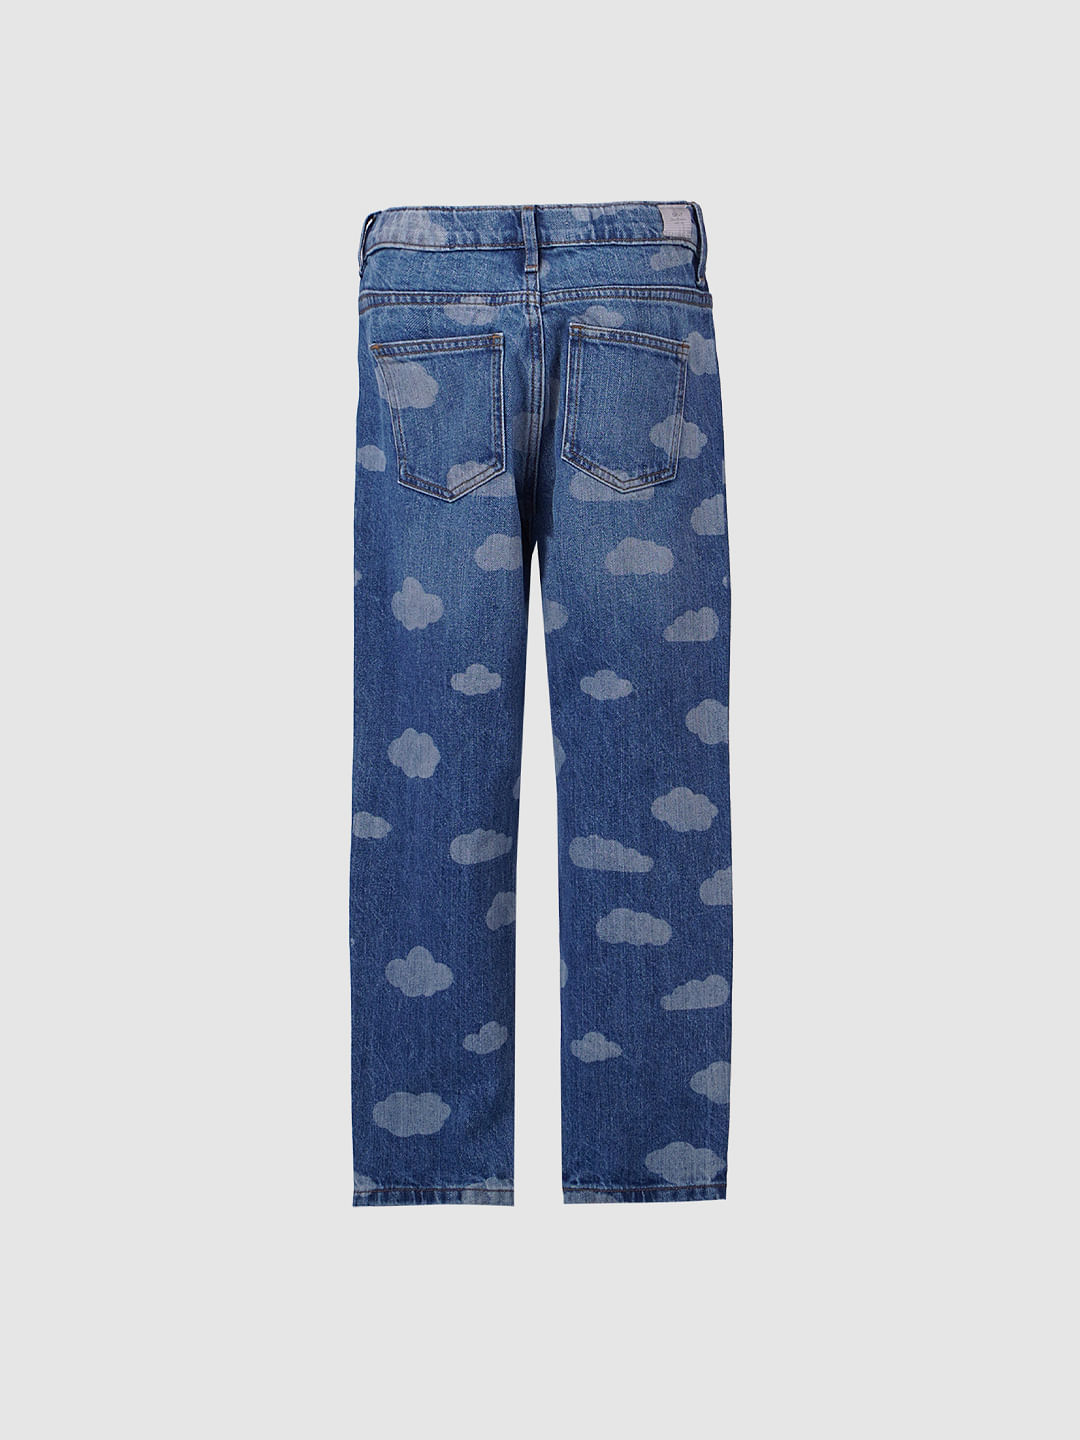 Printed Jeans Are Back Like It's 2012